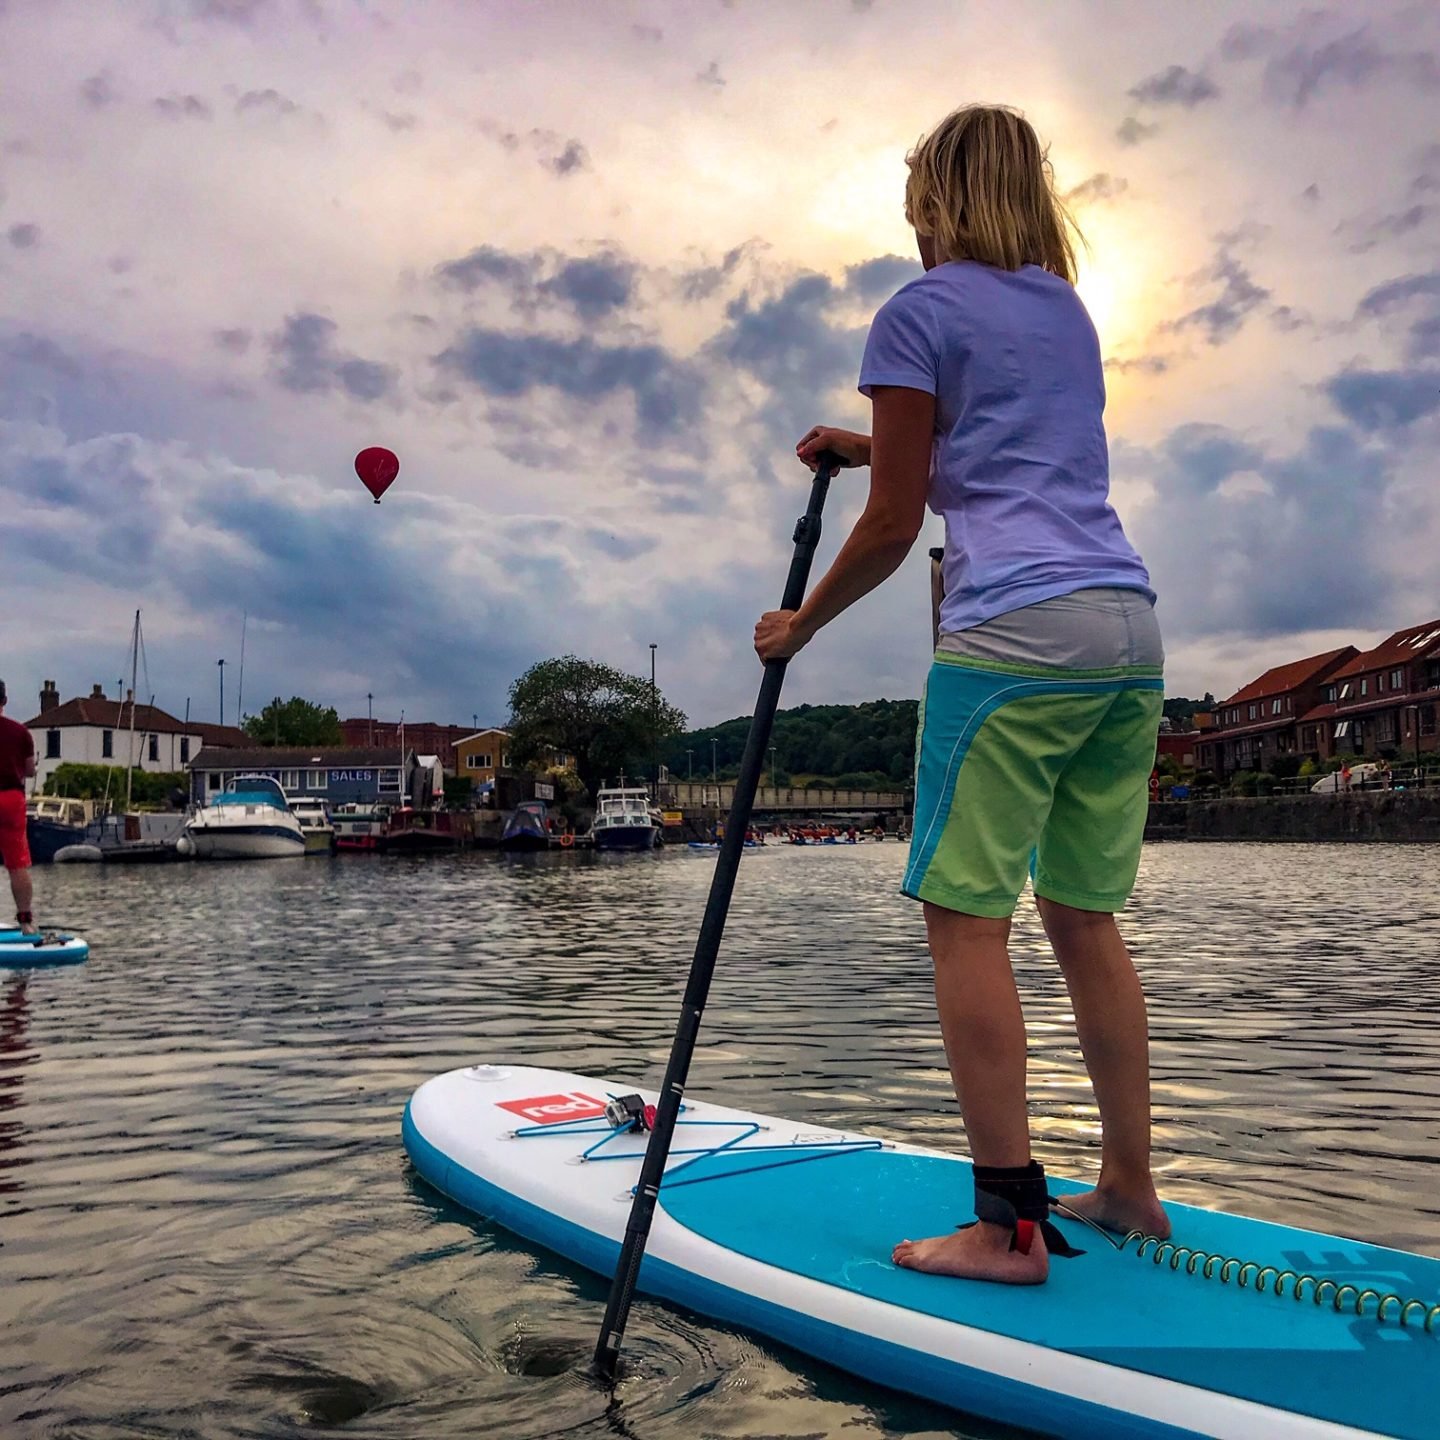 paddleboarding in Bristol, hot air balloons overhead